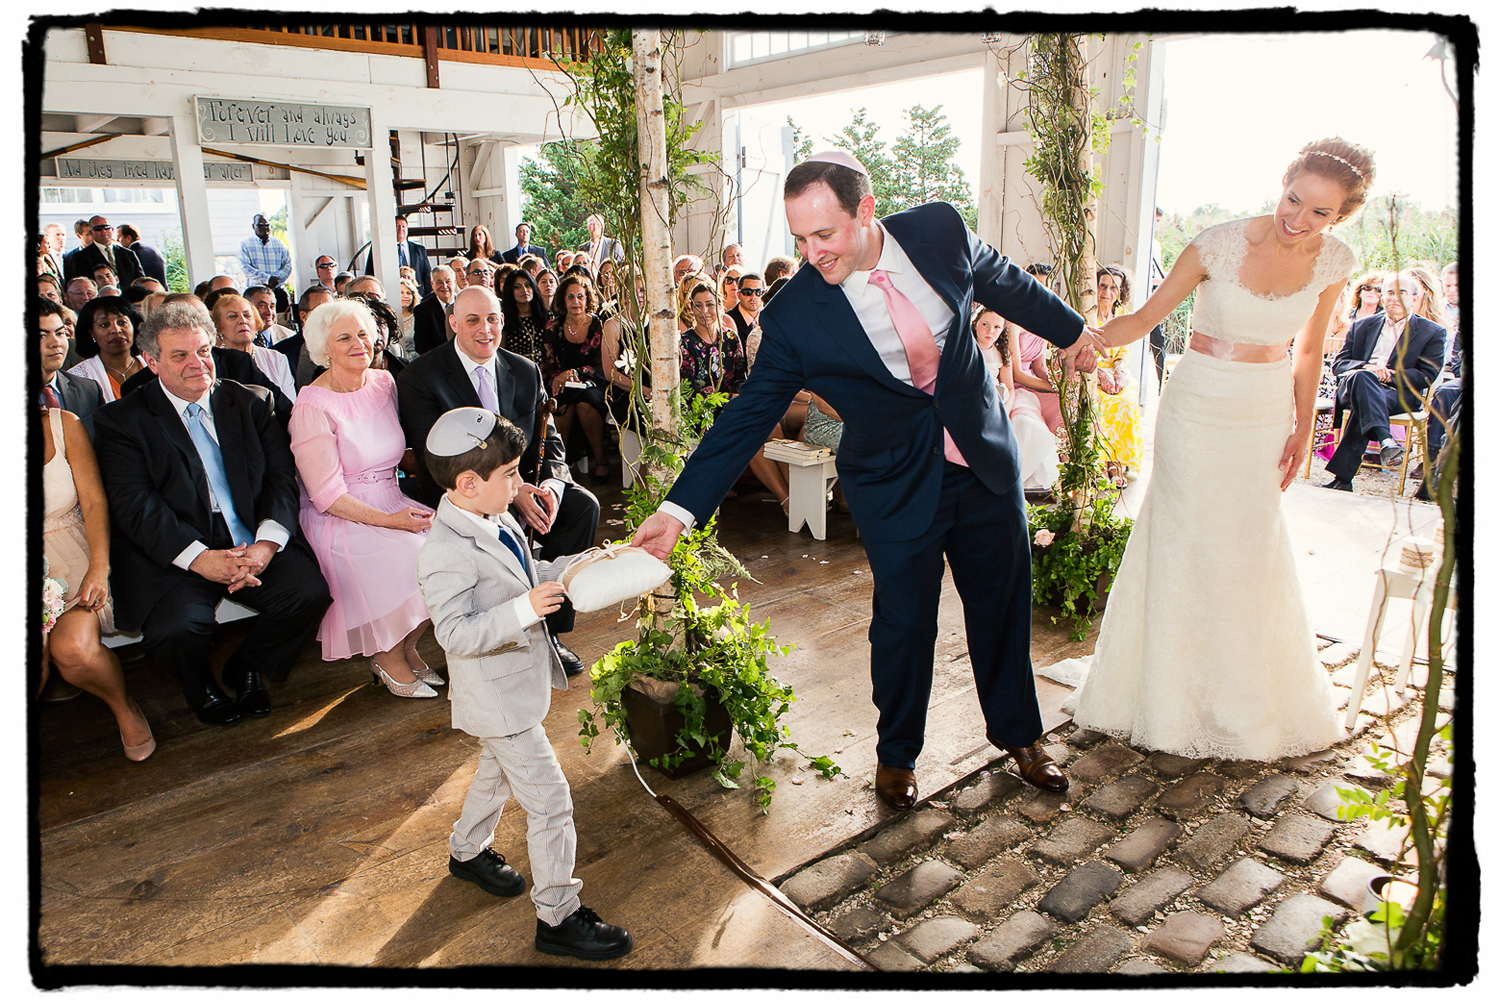 The ring bearer carefully makes his delivery in the chapel at Bonnet Island Estate.